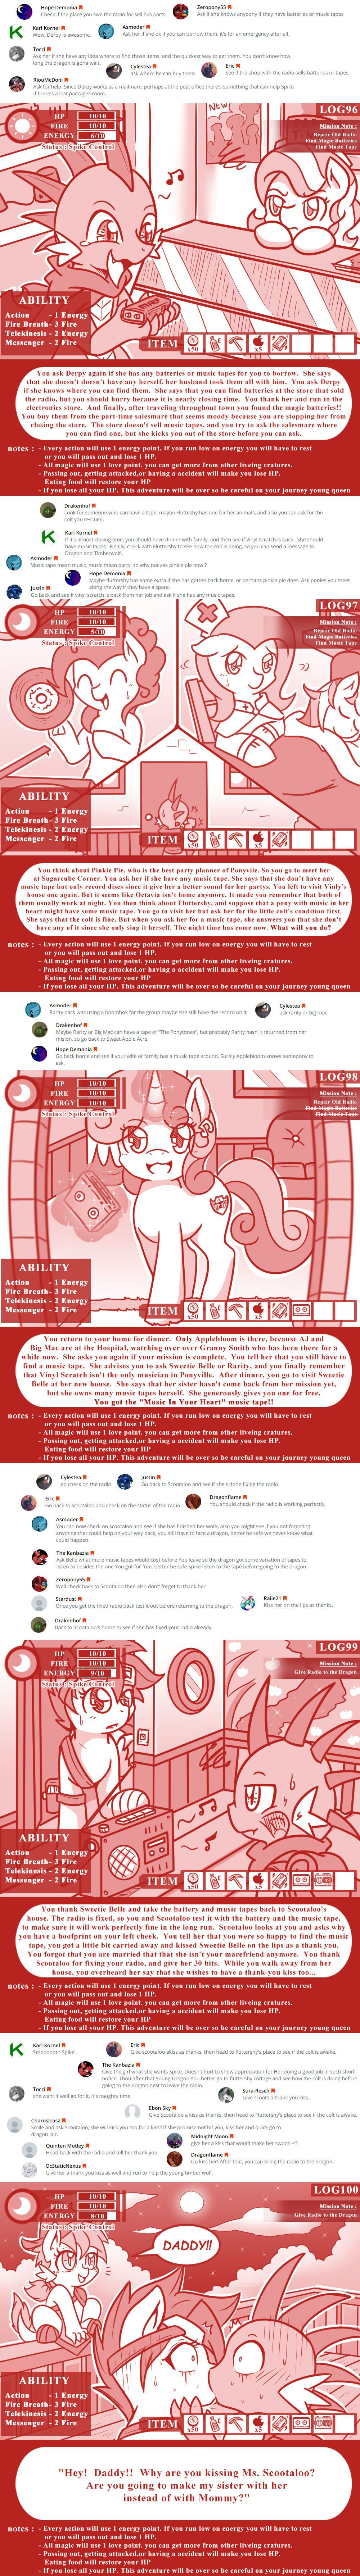 [Vavacung] The Adventure Logs Of Young Queen (My Little Pony: Friendship is Magic) [English] [Ongoing] 21